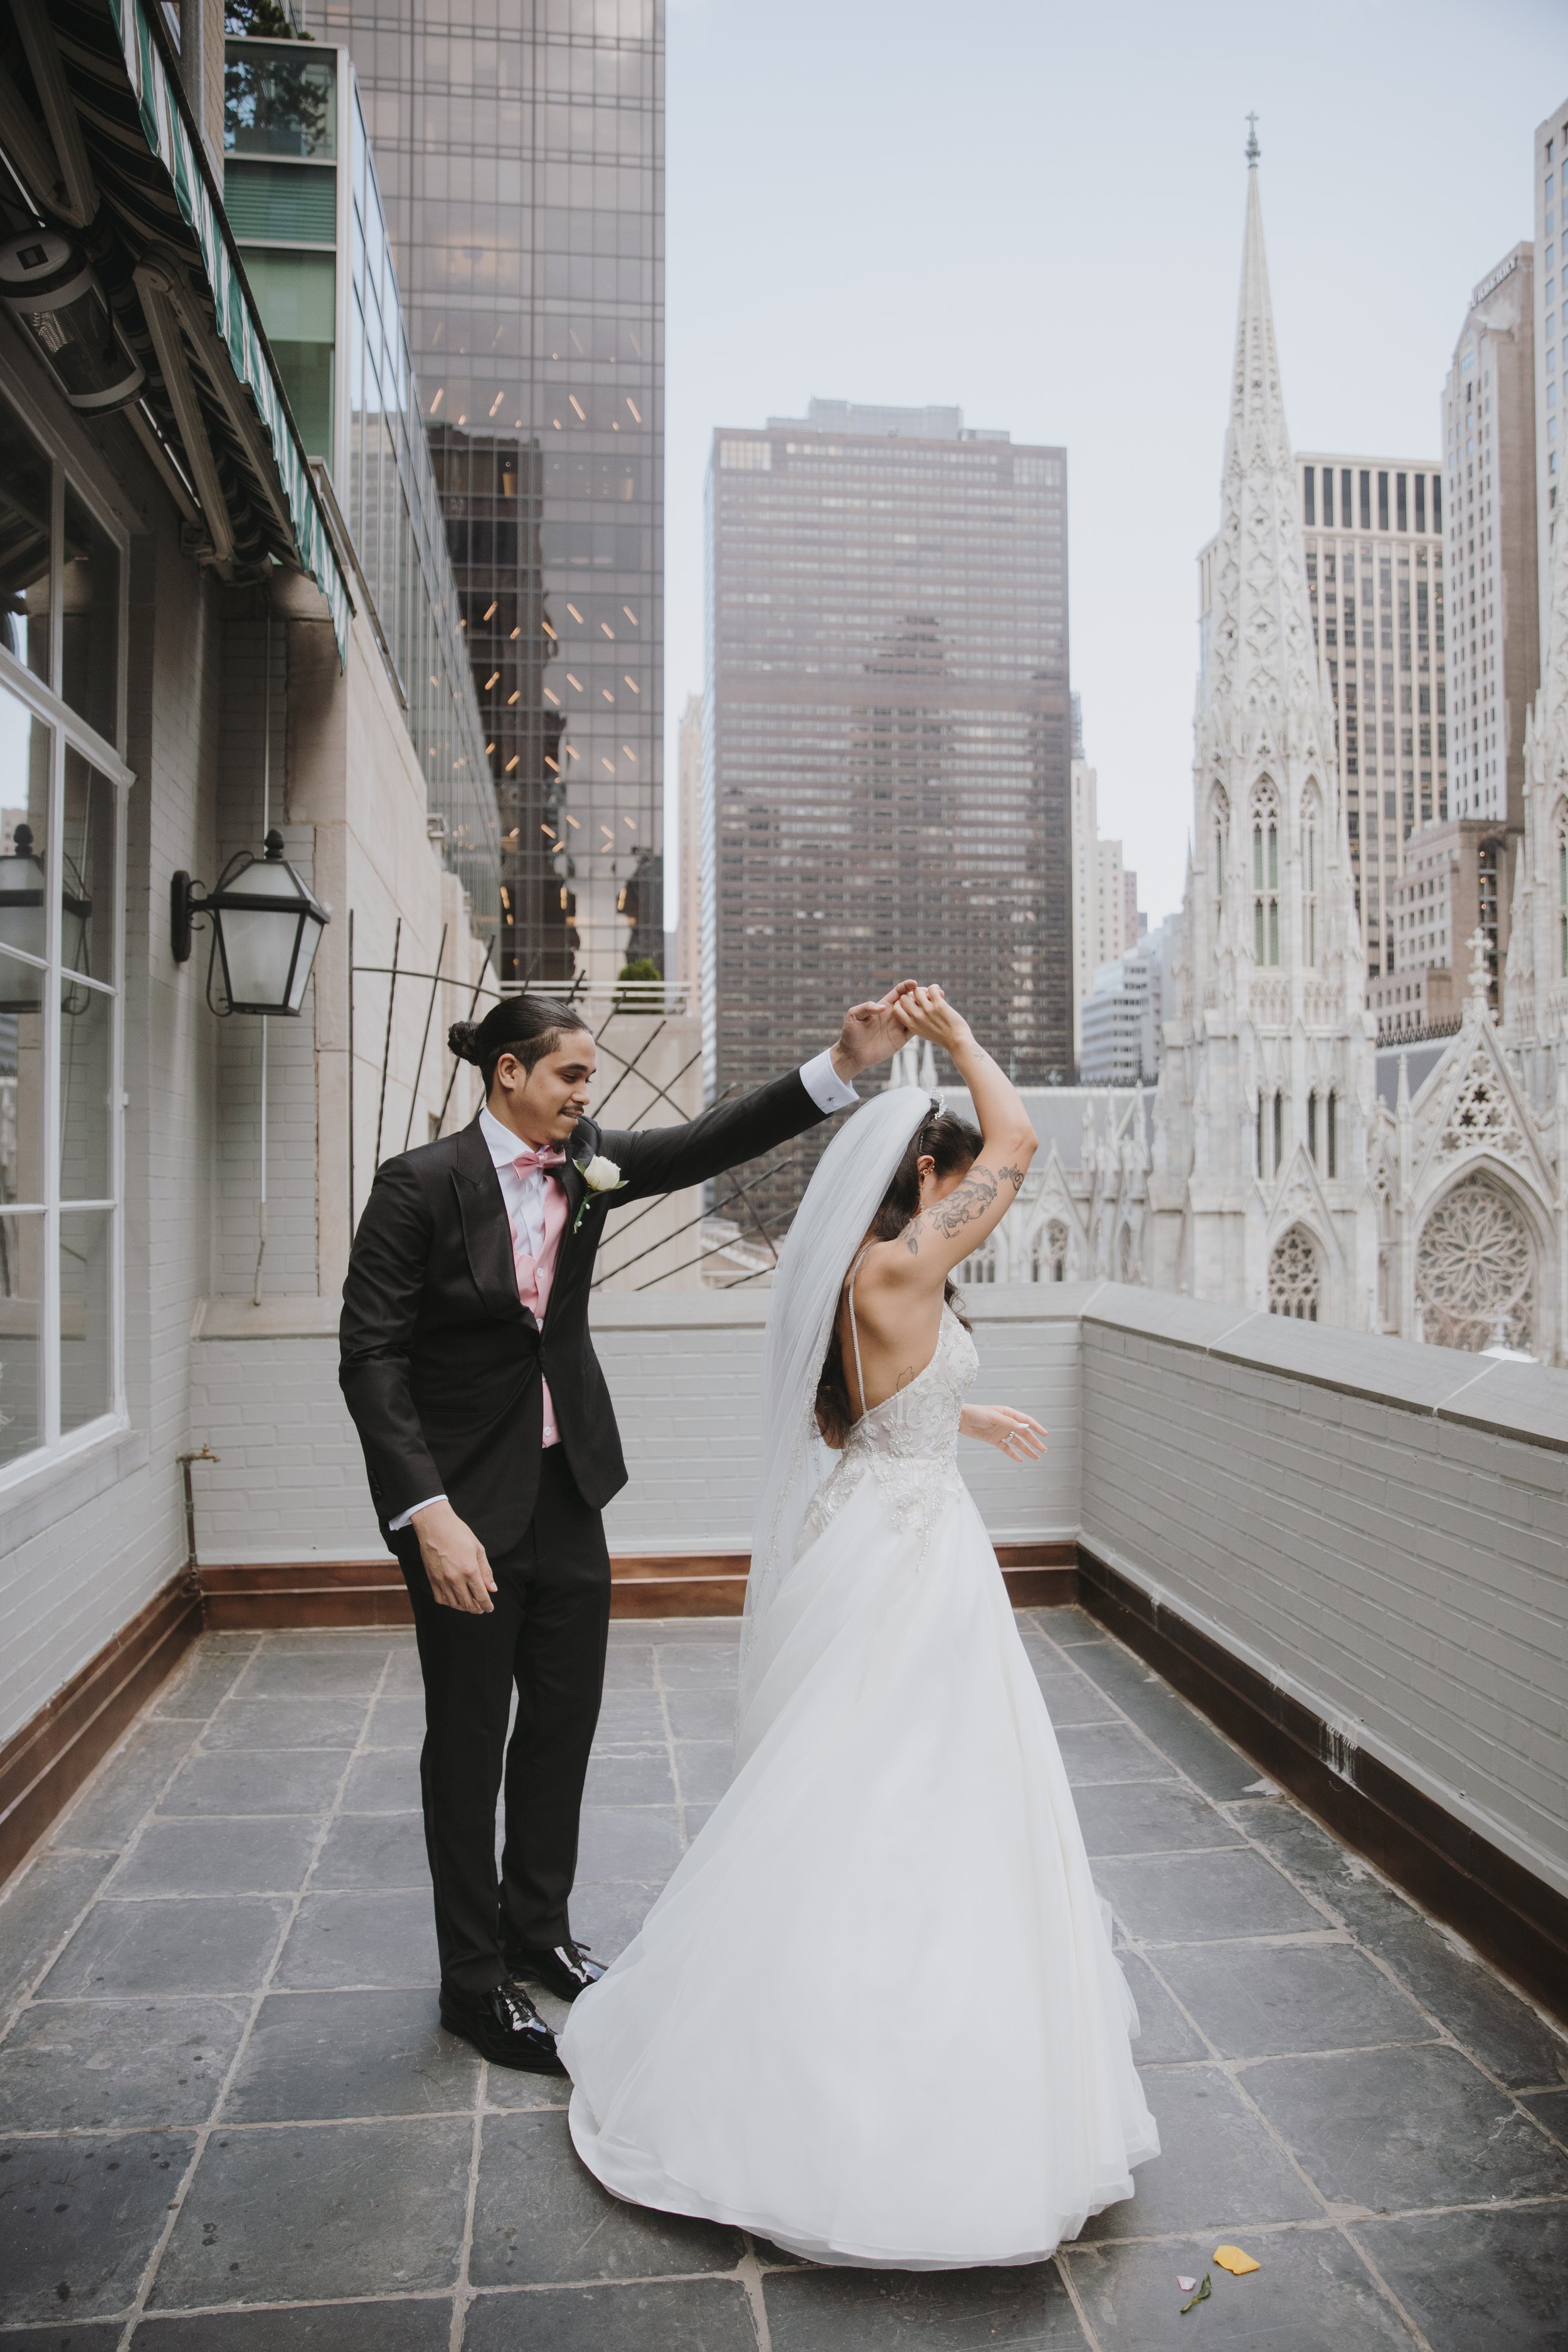 First Dance upon a balcony in the heart of New York City